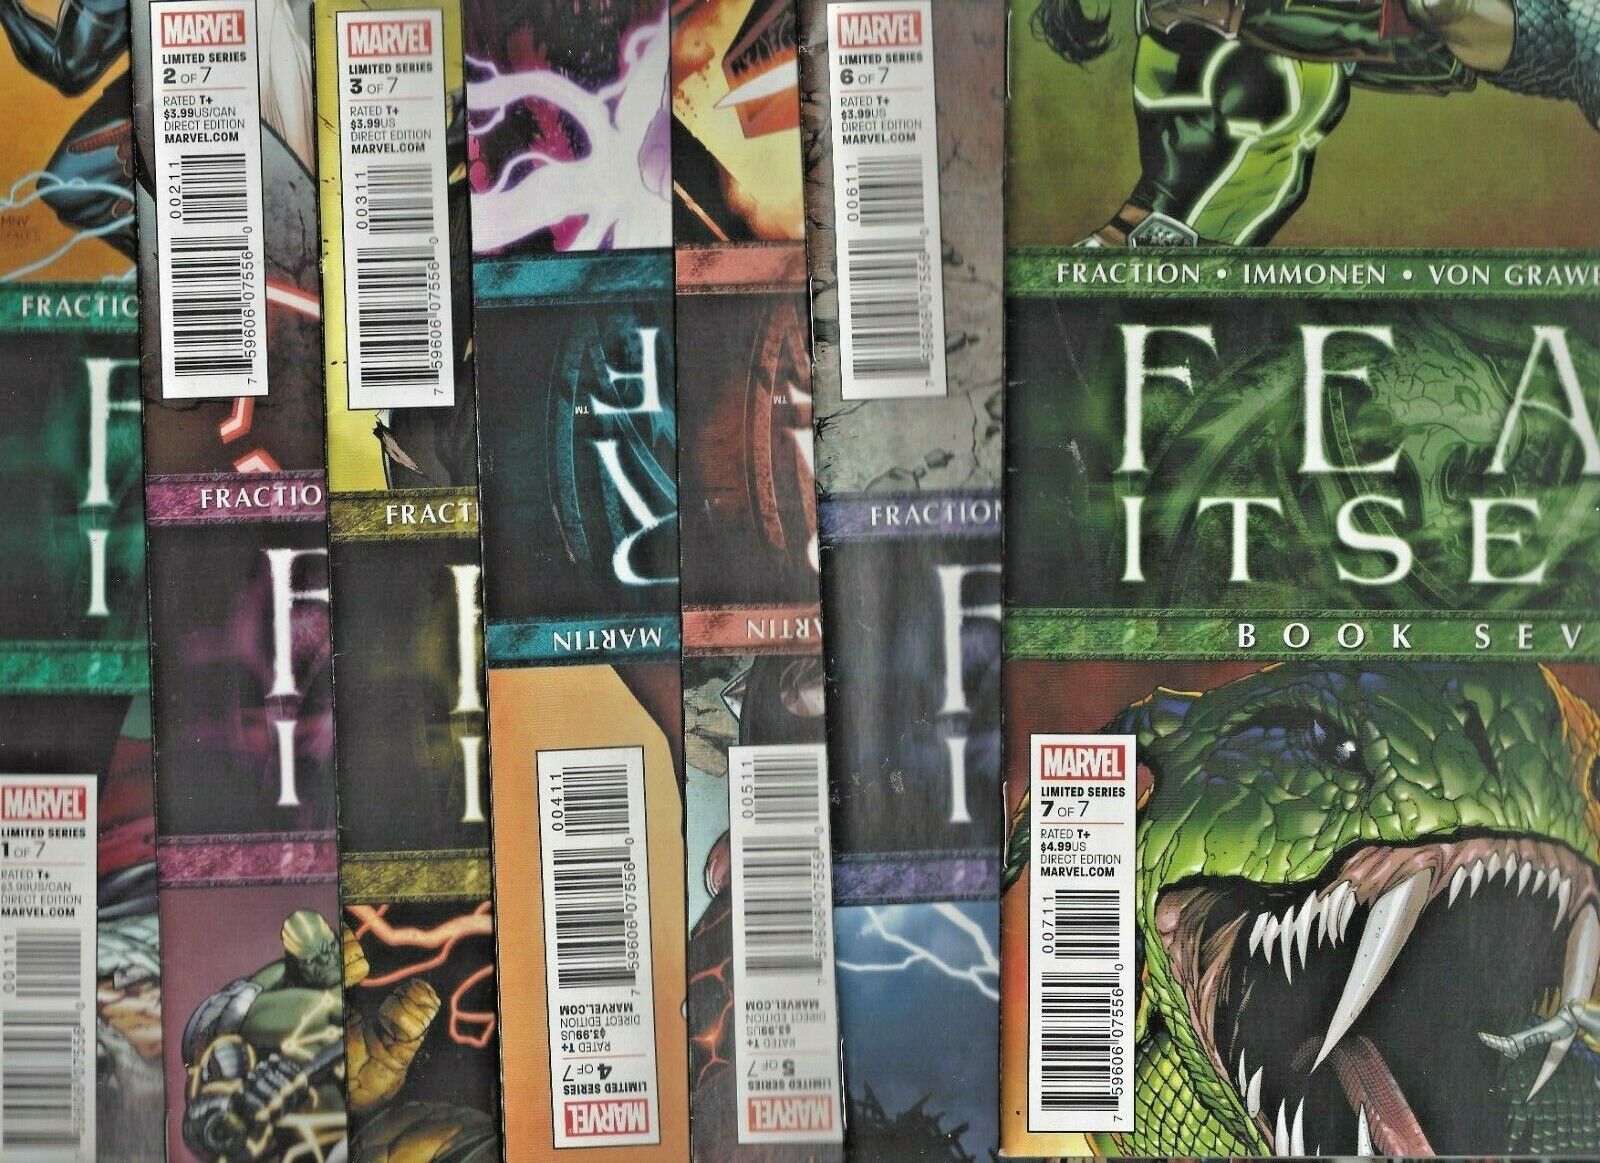 FEAR ITSELF #1 - #7 *FREE SHIPPING*  I WILL BEAT ANY PRICE 